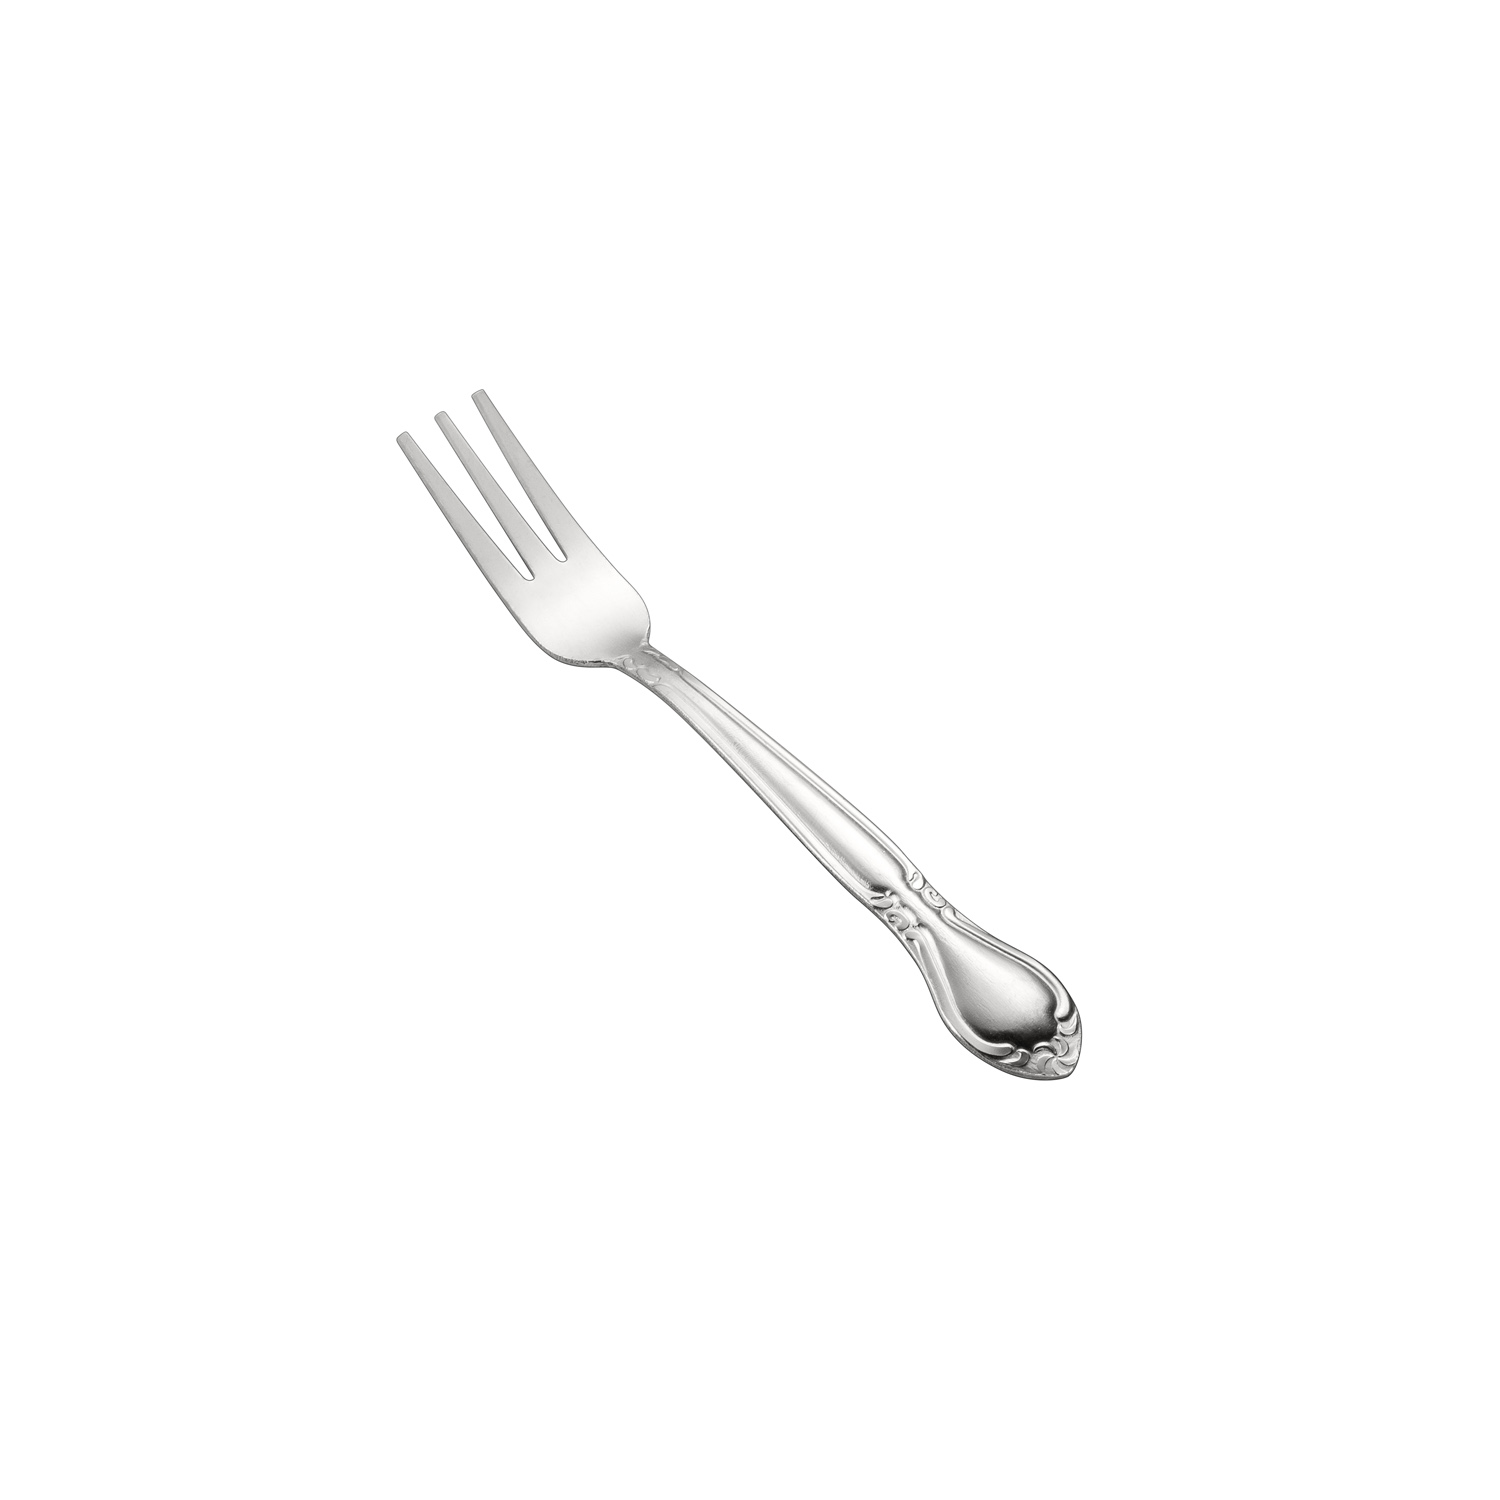 CAC China 2003-07 Elizabeth Oyster Fork Frost, Heavyweight 18/0, 6"